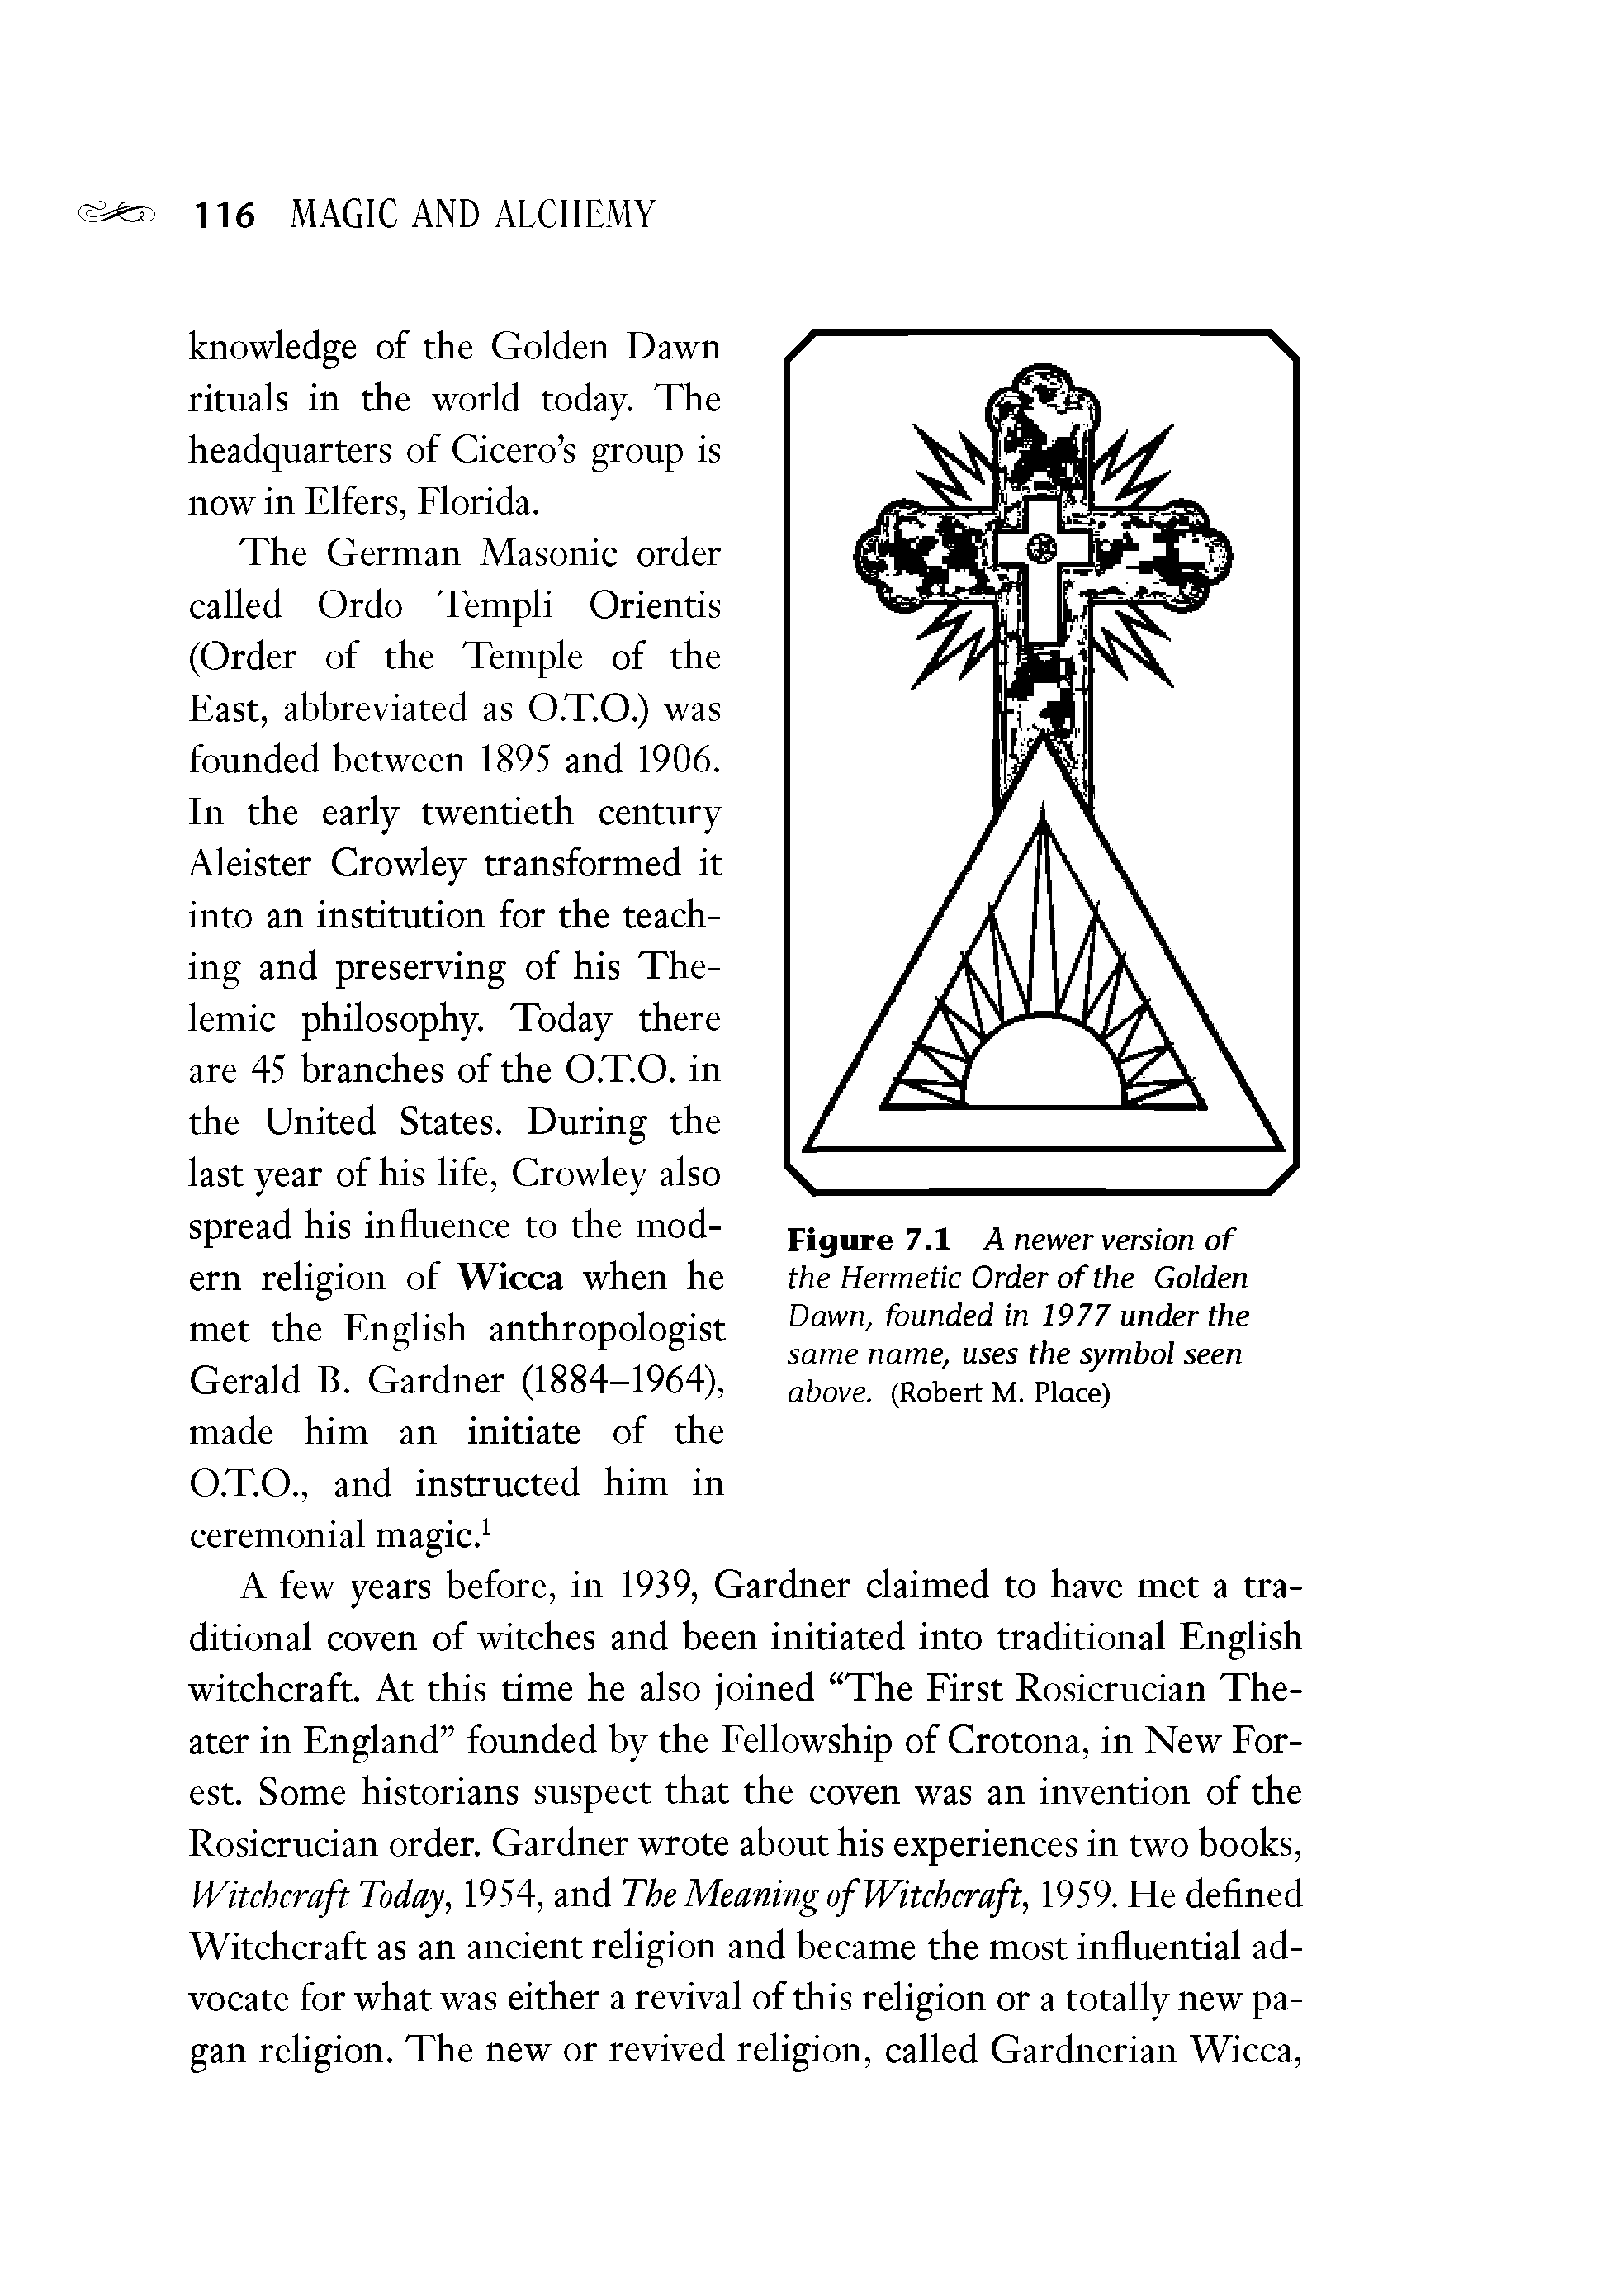 Figure 7.1 A newer version of the Hermetic Order of the Golden Dawn, founded in 1977 under the same name, uses the symbol seen above. (Robert M. Place)...